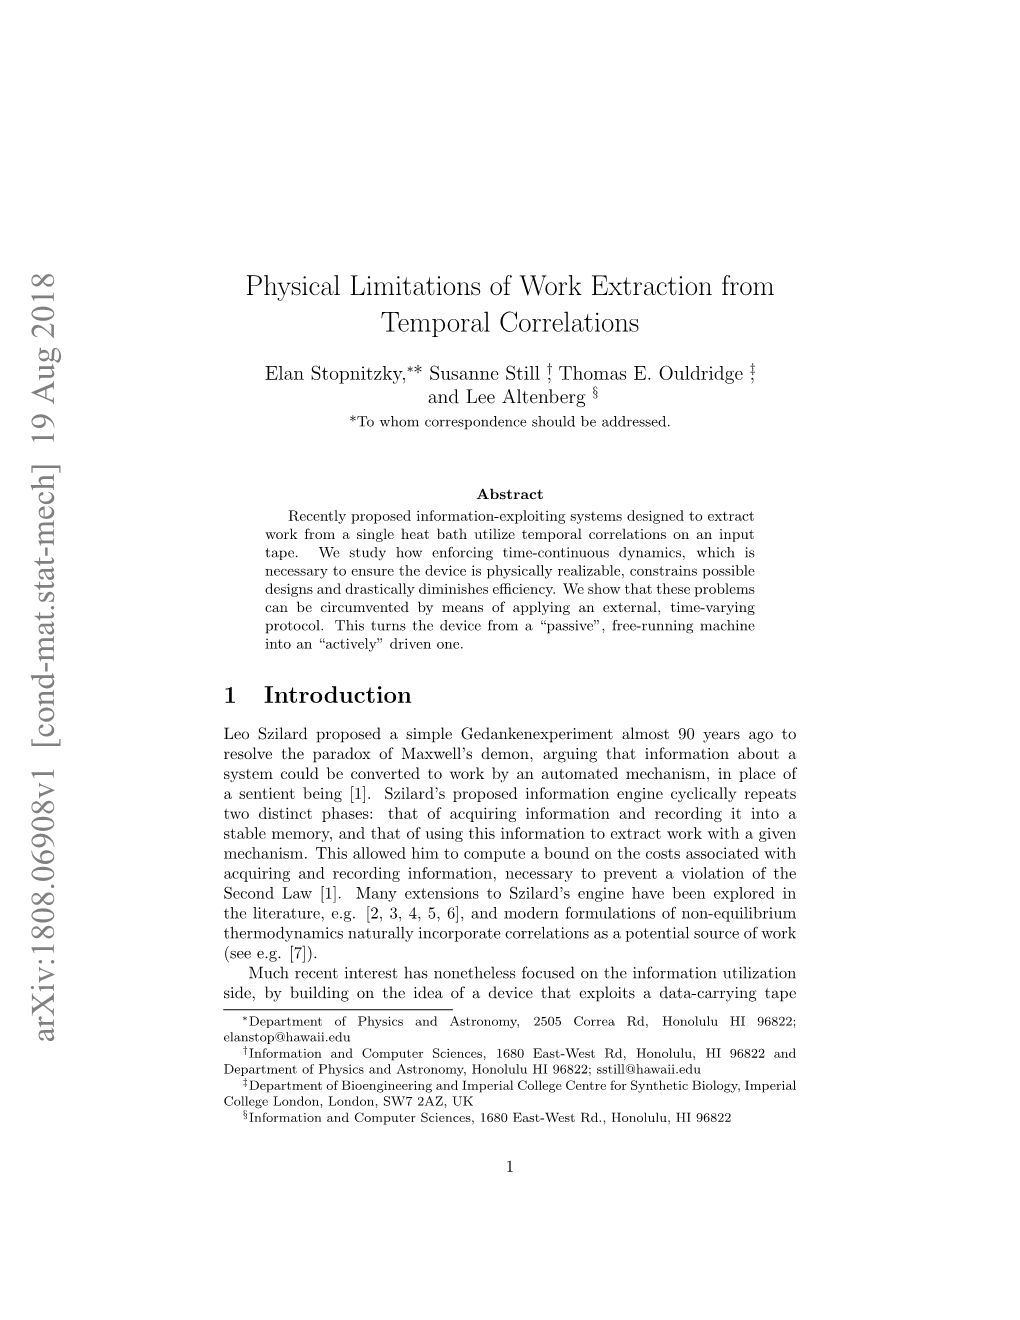 Physical Limitations of Work Extraction from Temporal Correlations